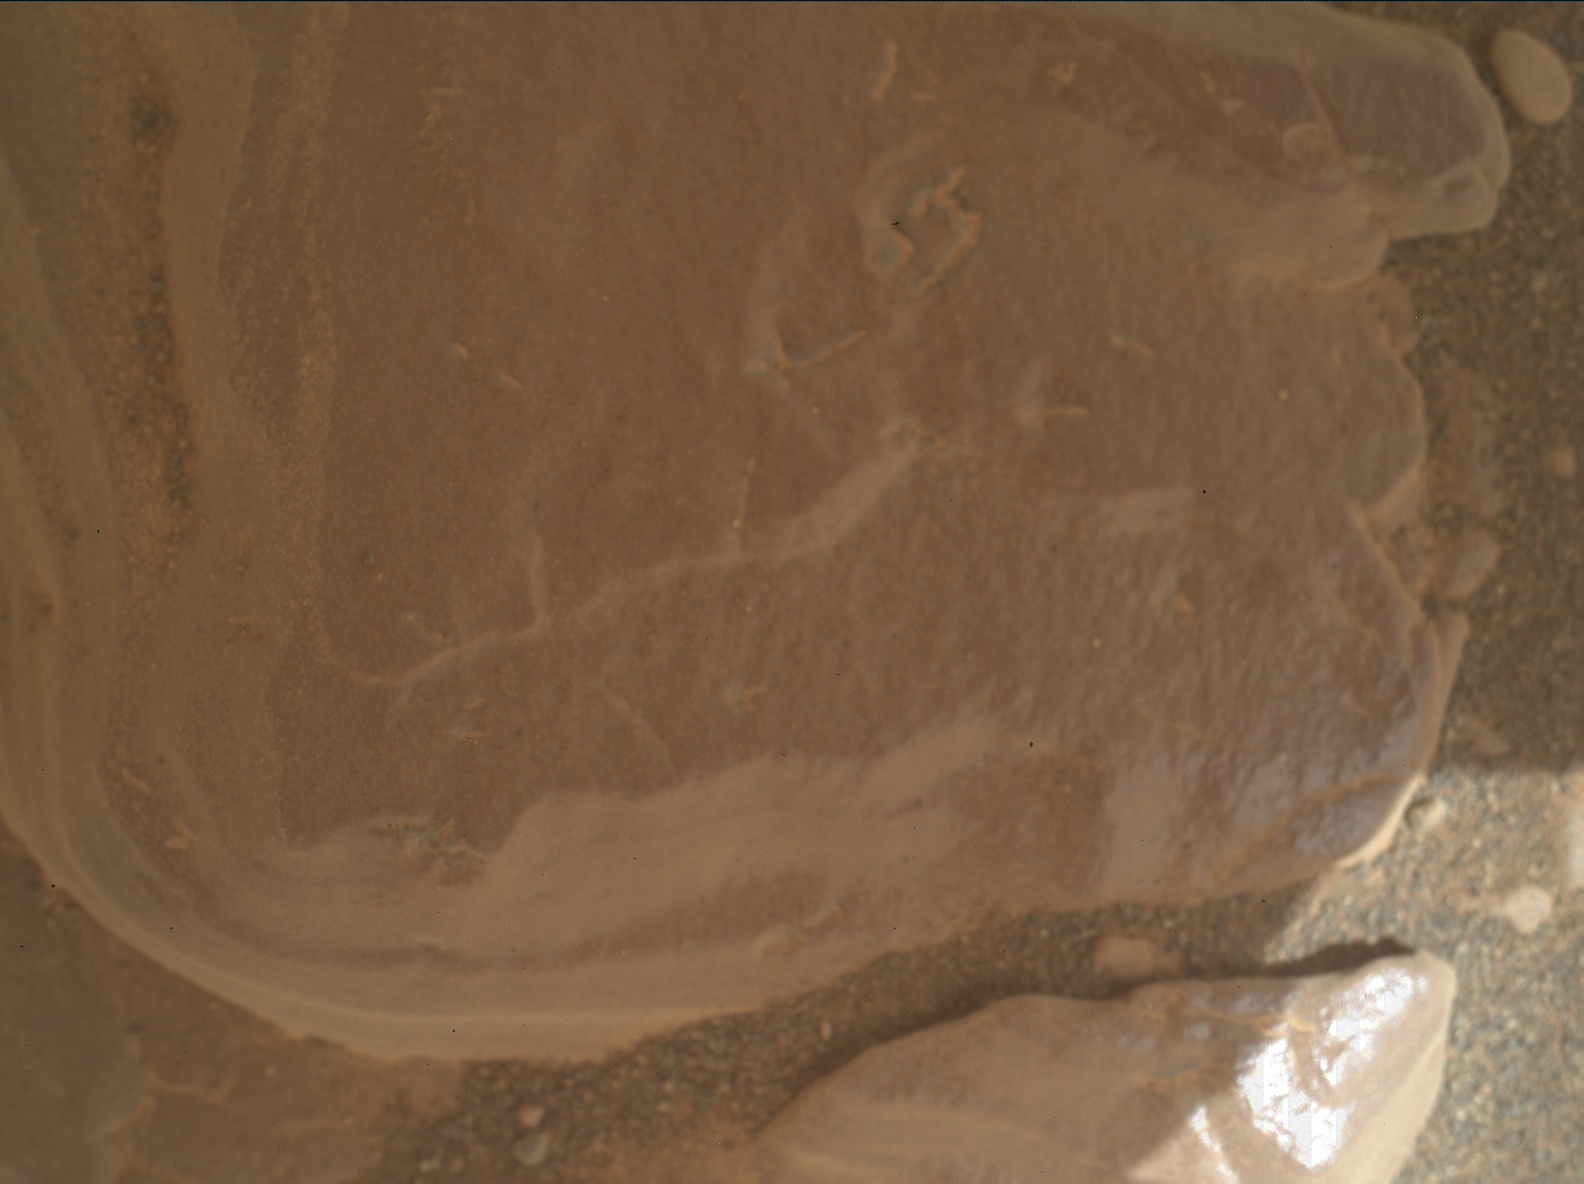 Nasa's Mars rover Curiosity acquired this image using its Mars Hand Lens Imager (MAHLI) on Sol 2933